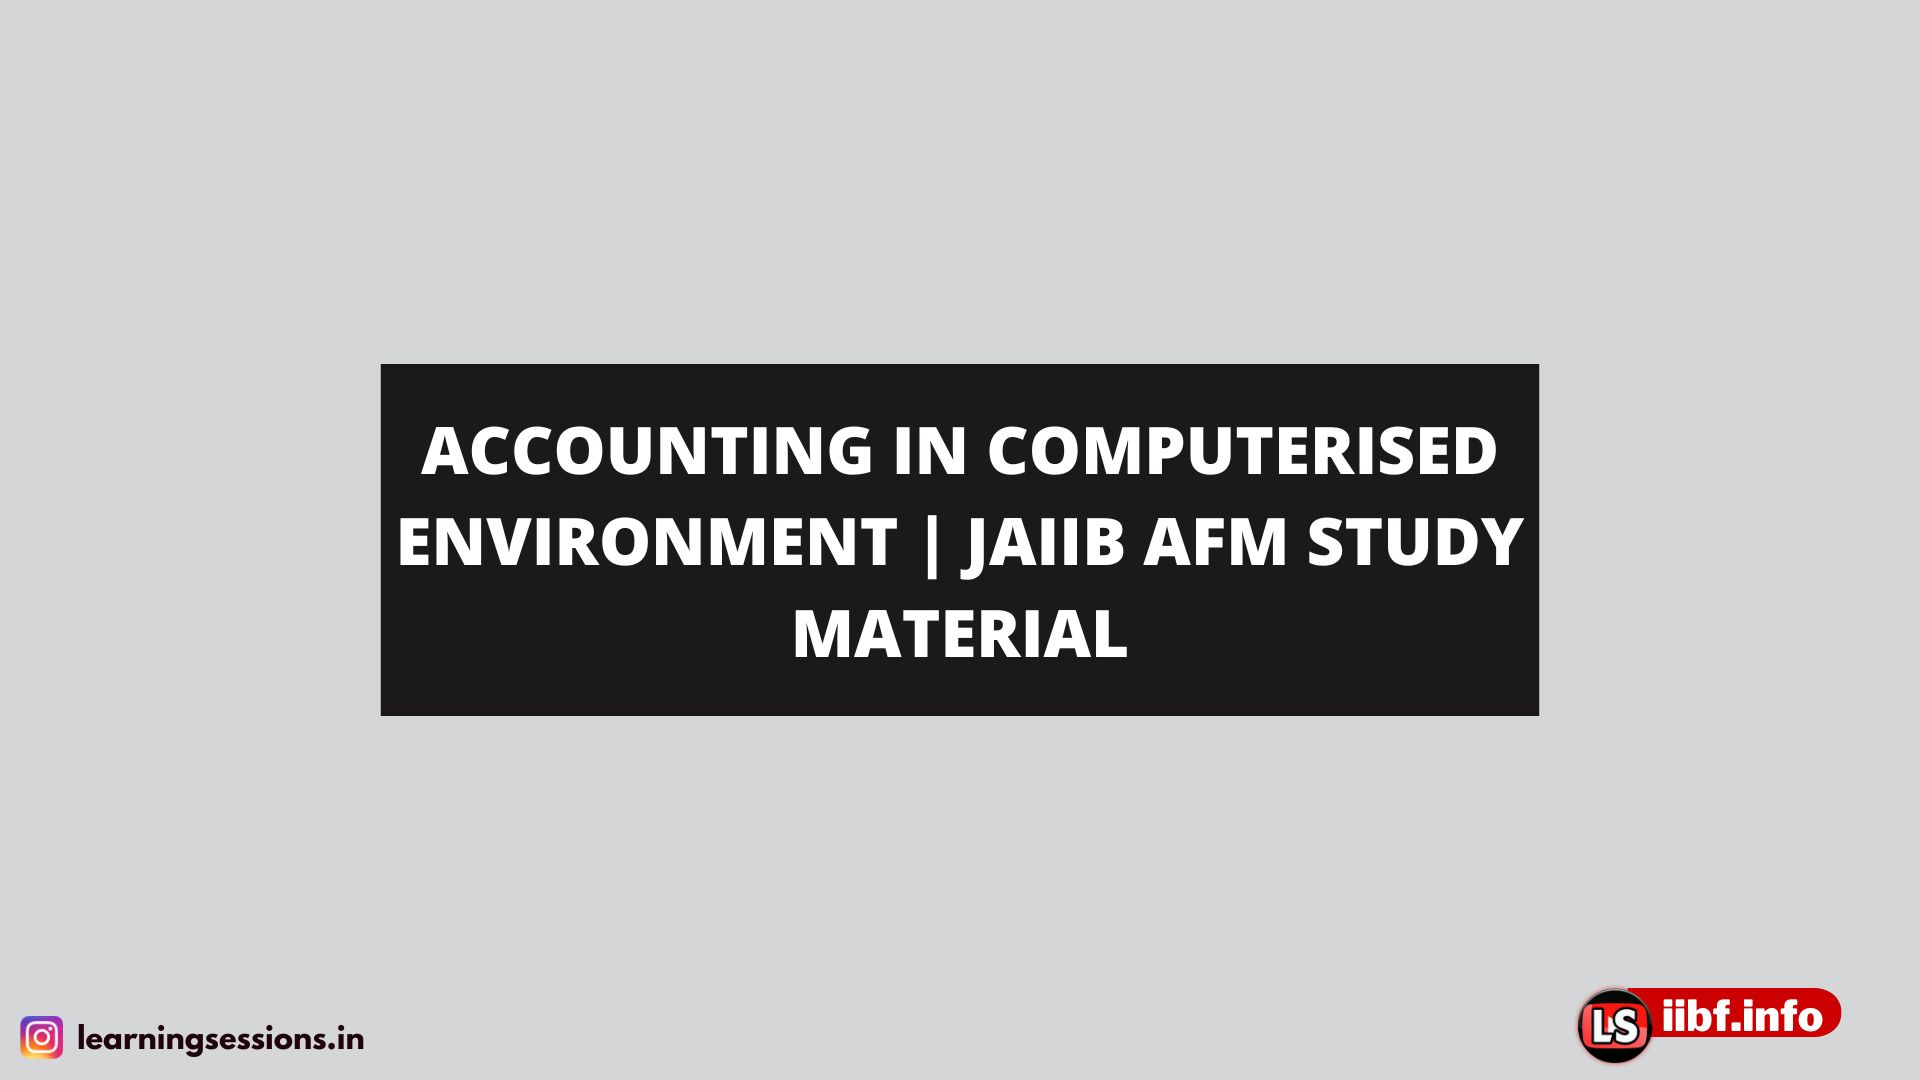 ACCOUNTING IN COMPUTERISED ENVIRONMENT | JAIIB AFM STUDY MATERIAL